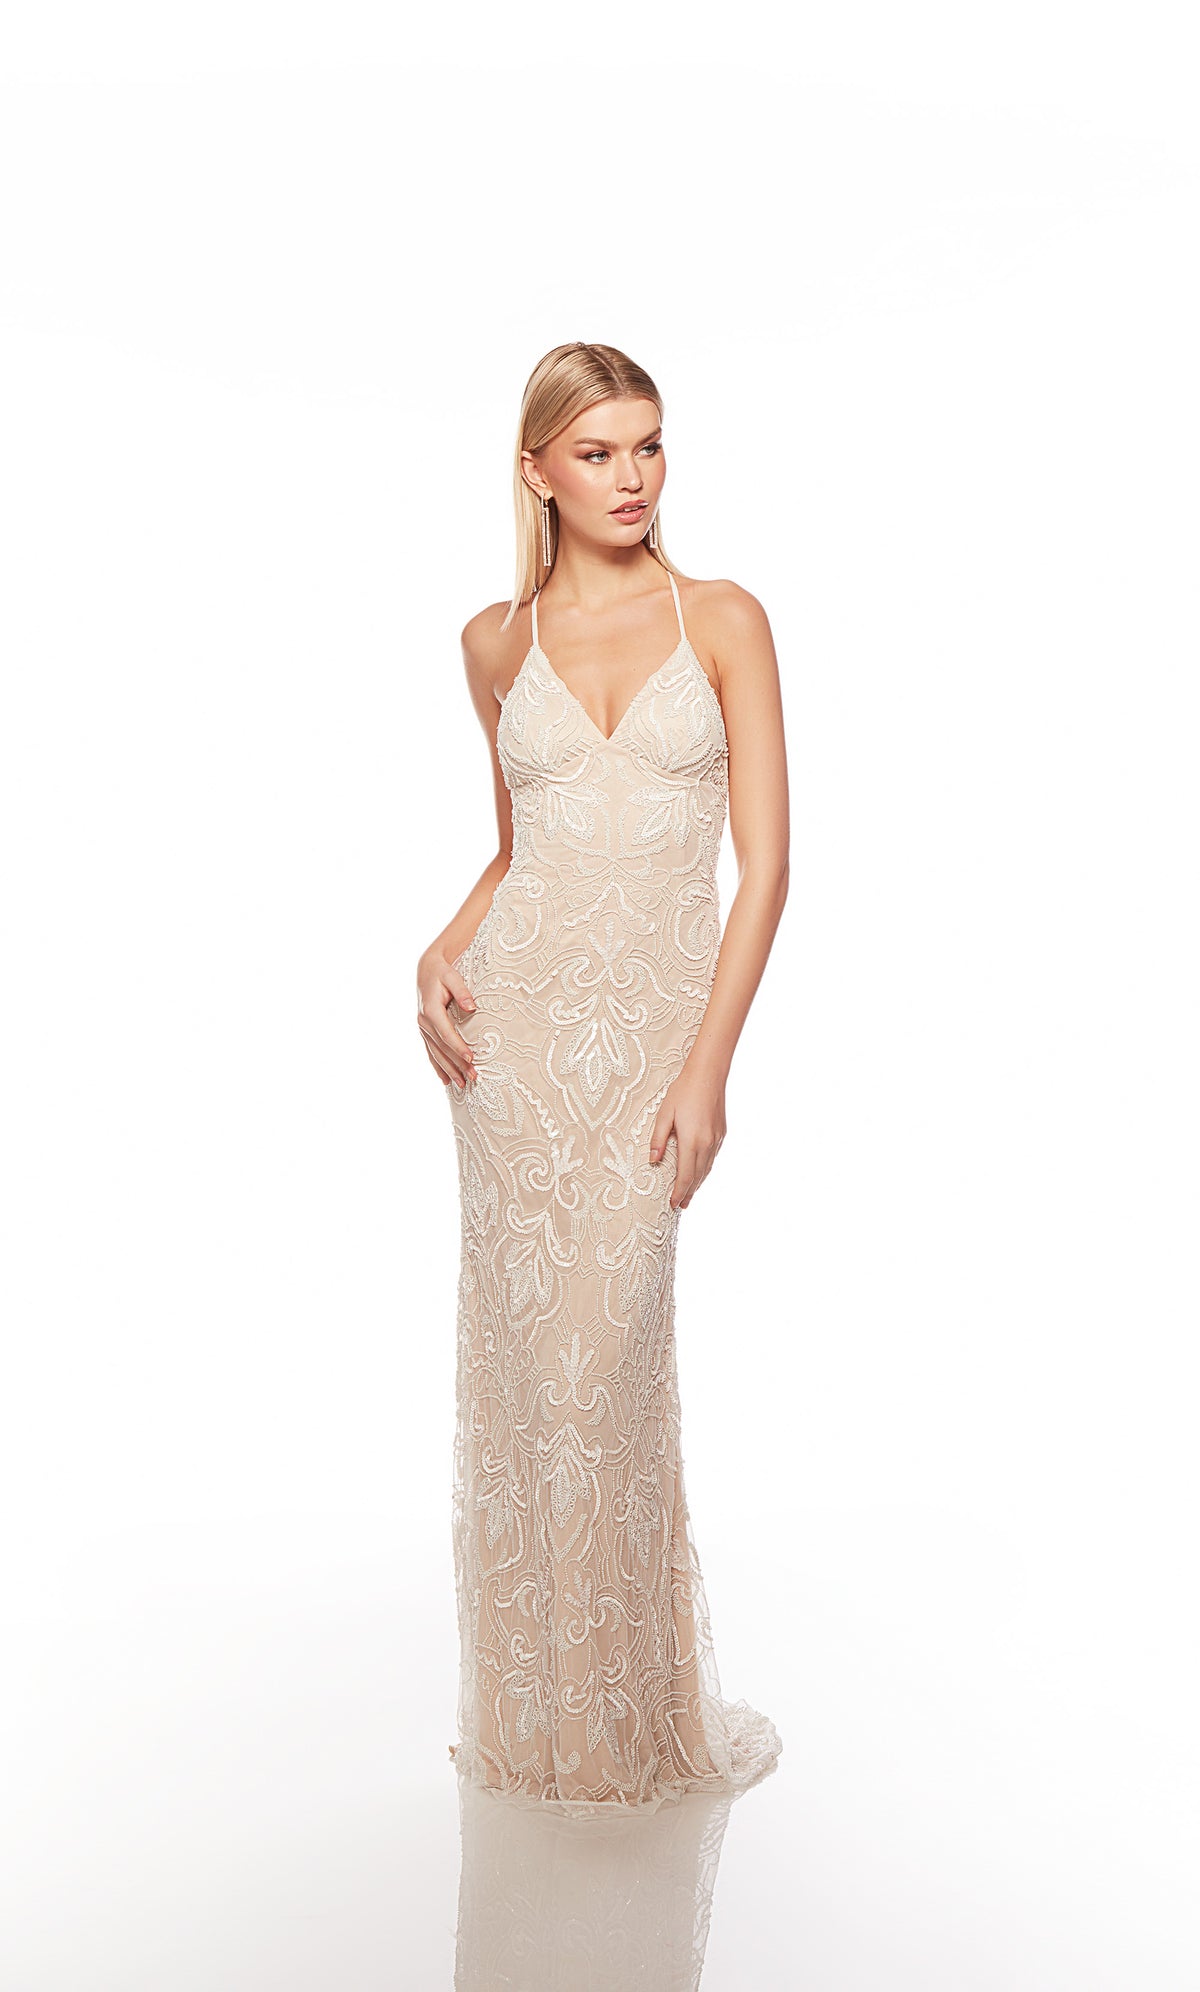 Elegant ivory-nude formal gown: Hand-beaded, V neckline, spaghetti straps, strappy back, and intricate floral design for an chic and sophisticated look.